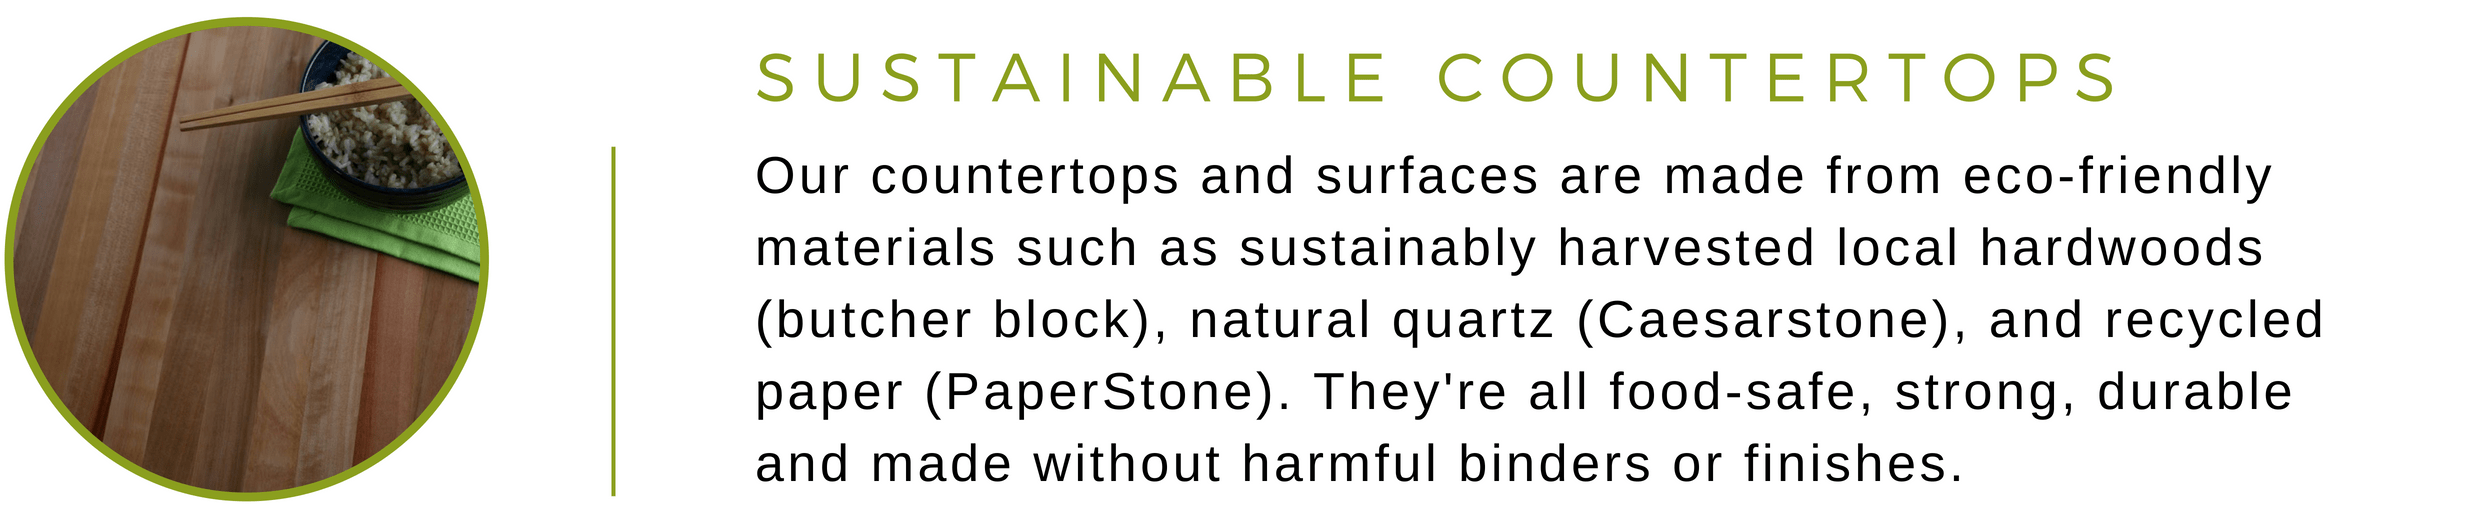 Our countertops and surfaces are made from eco-friendly materials such as sustainably harvested local hardwoods (butcher block), natural quartz (Caesarstone), and recycled paper (PaperStone). They're all food-safe, strong, durable  and made without harmful binders or finishes.